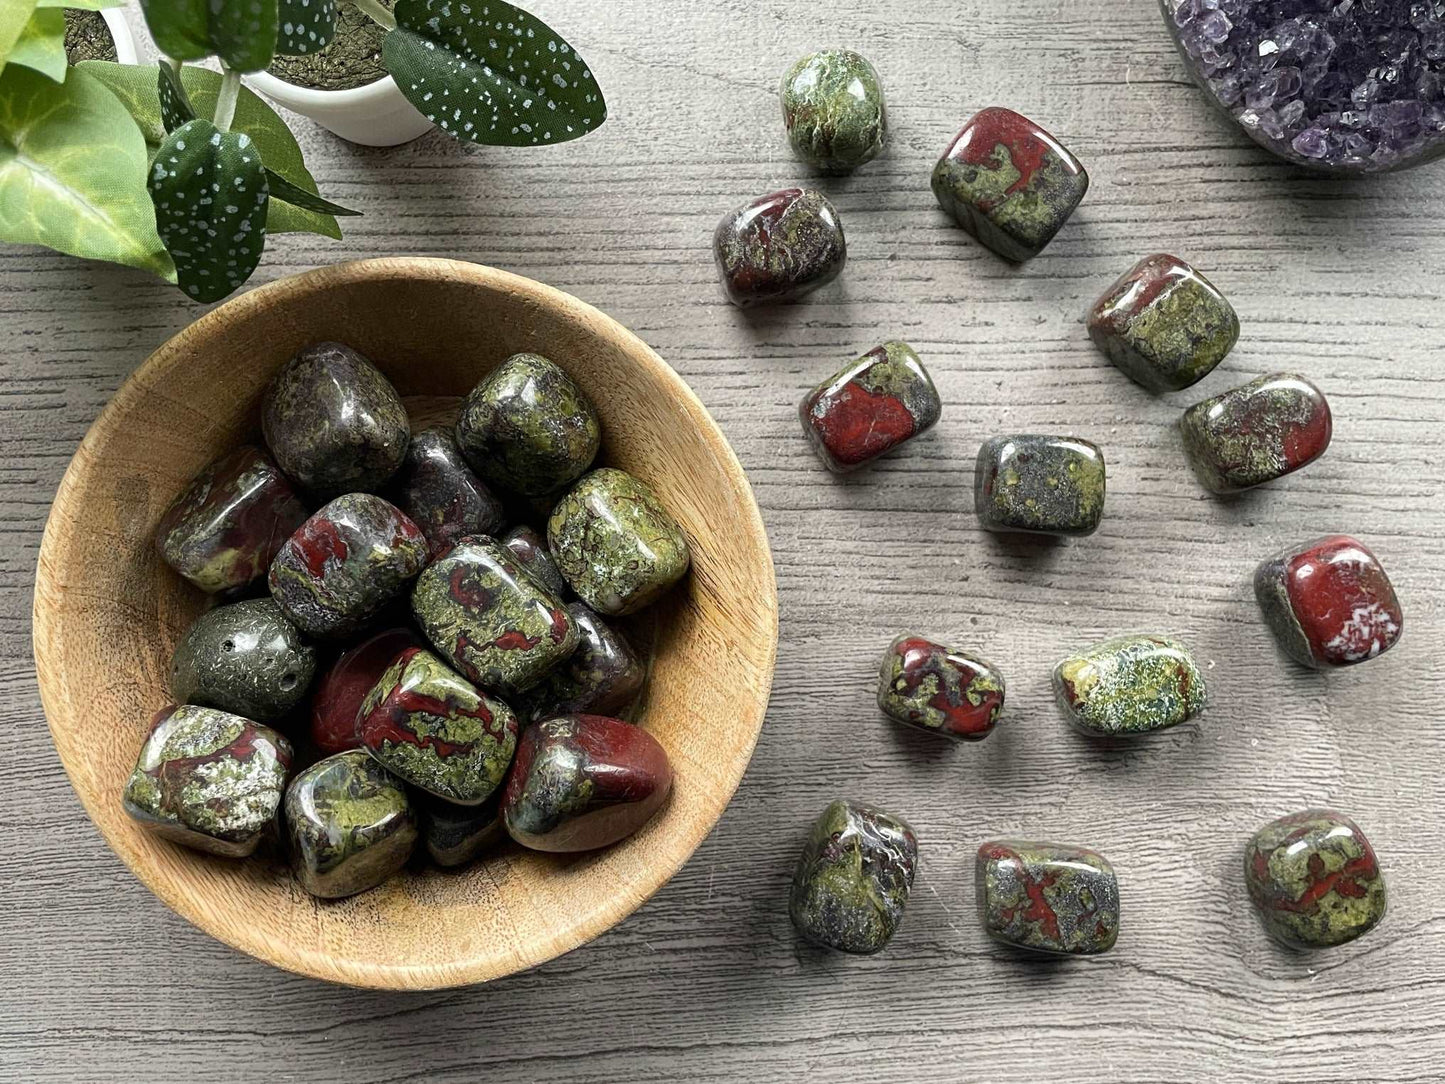 Pictured are various dragon bloodstone tumbled stones.